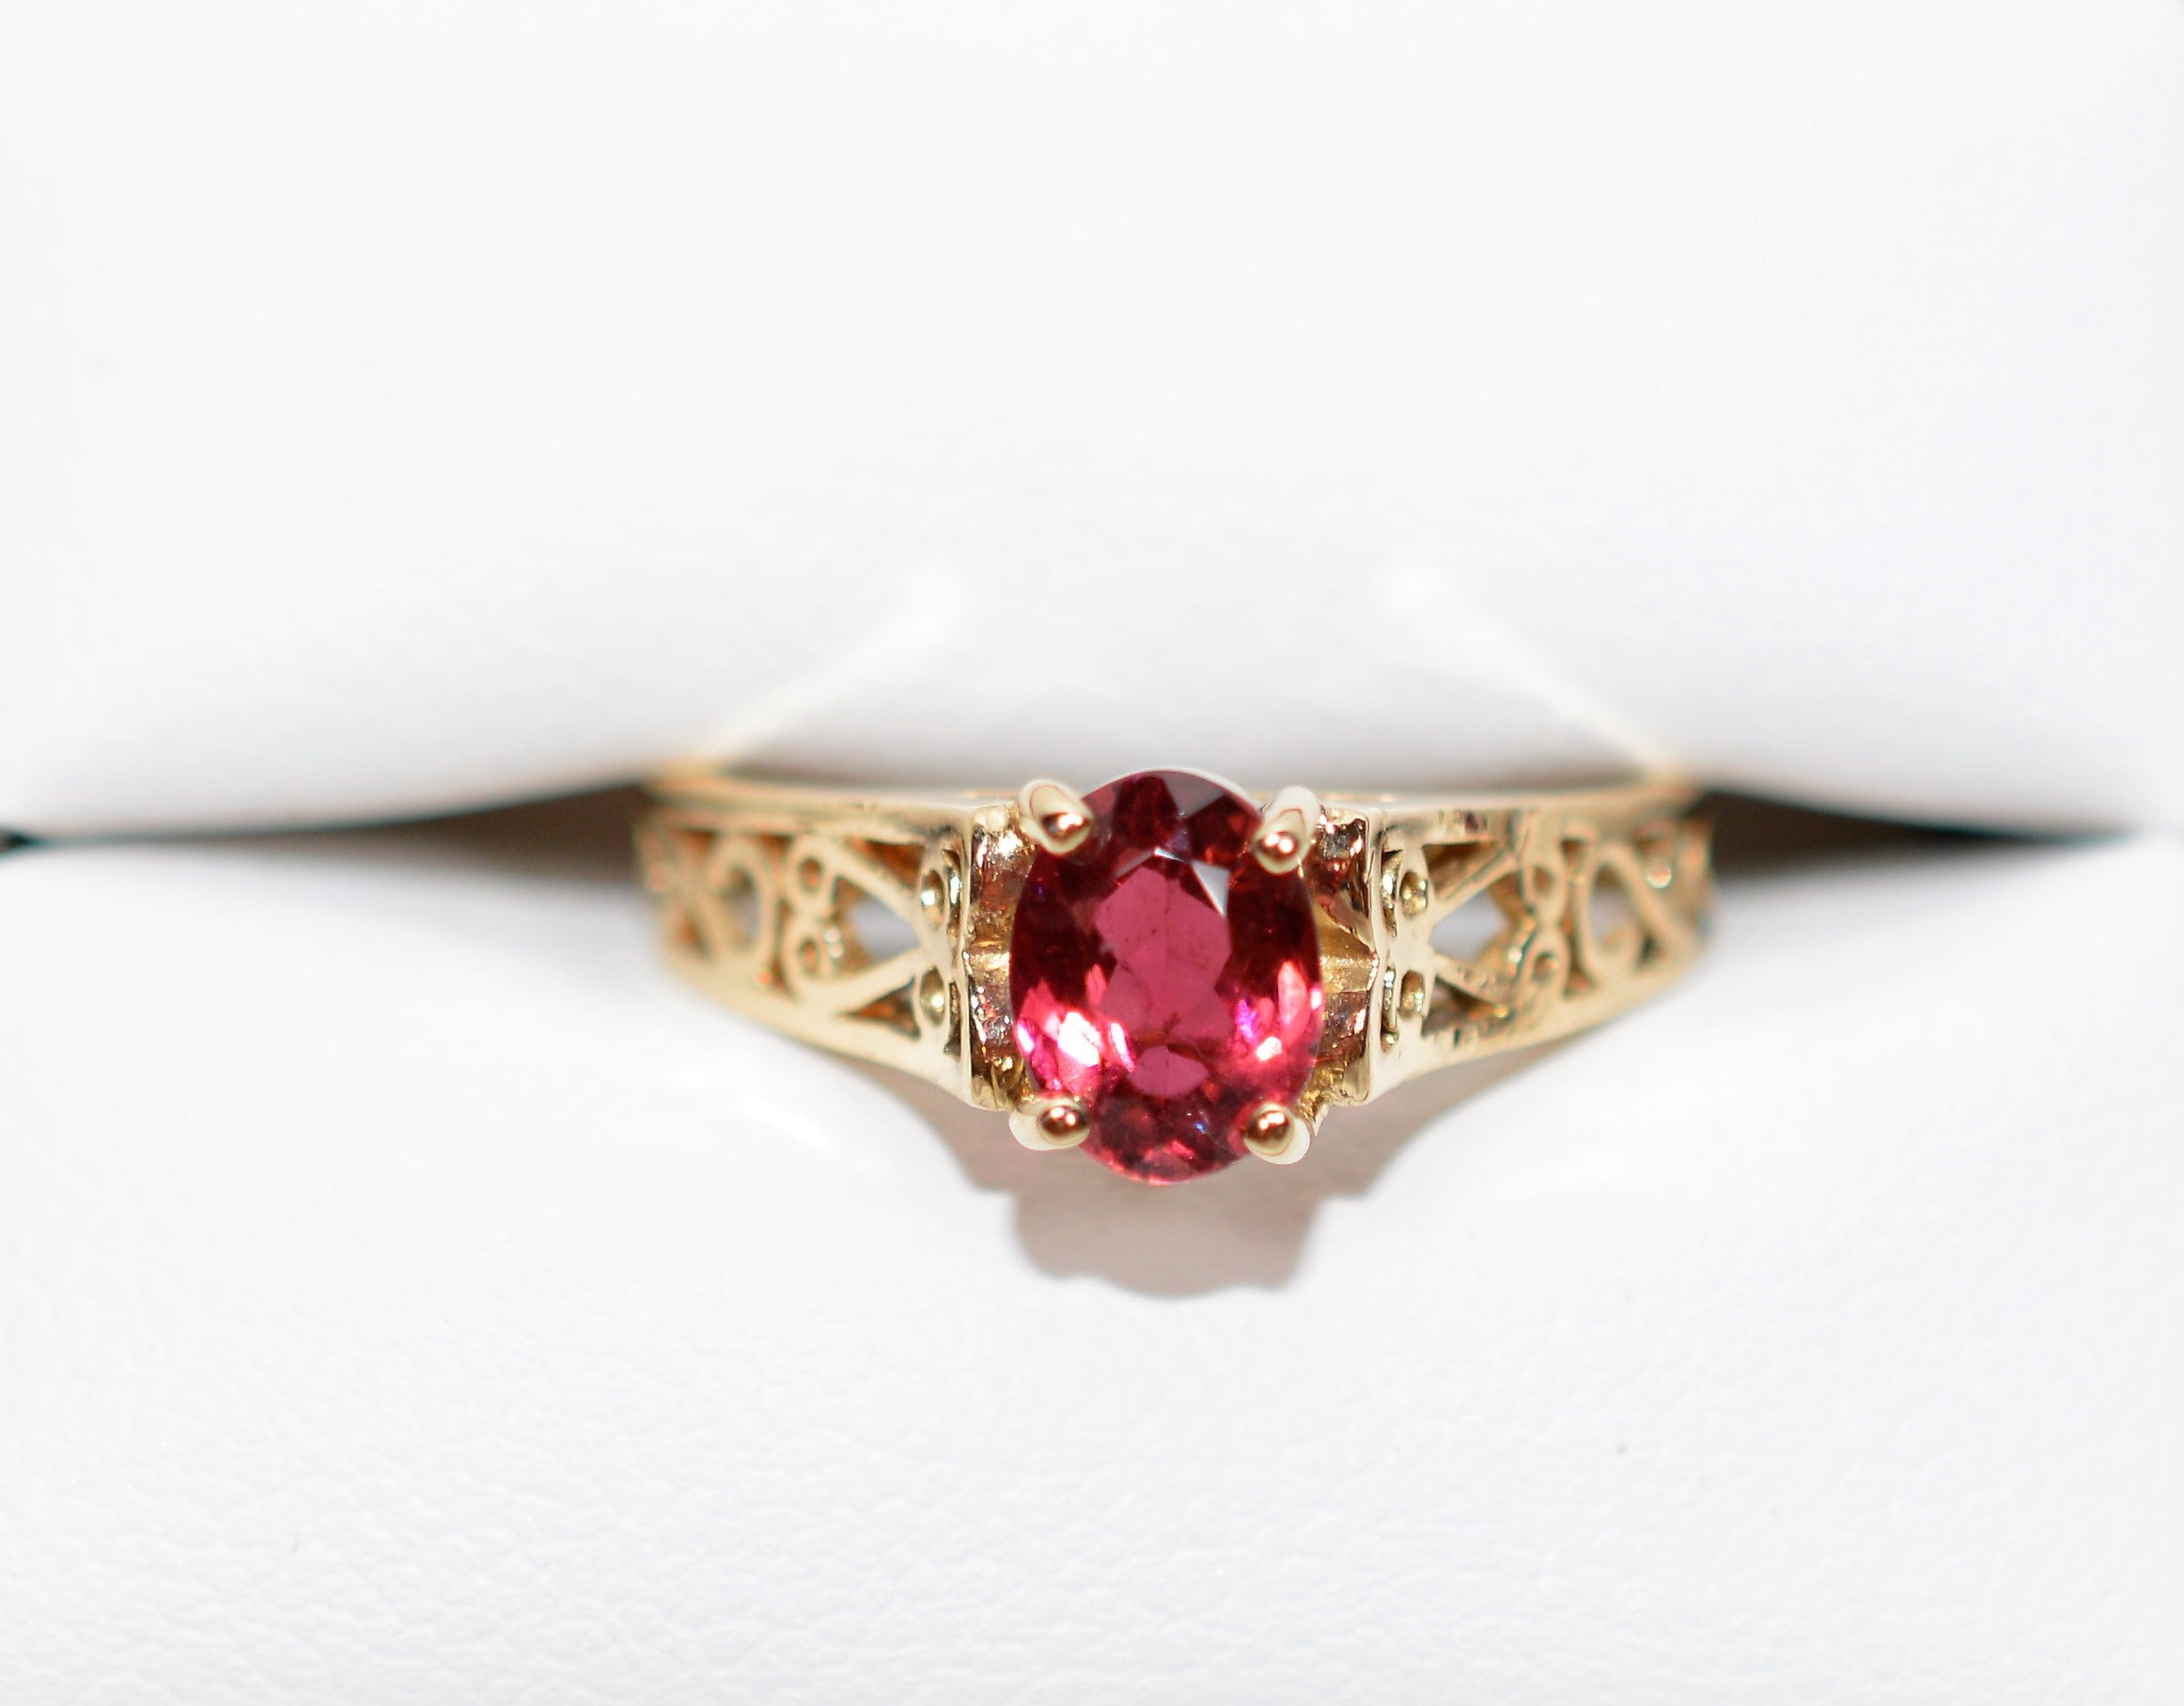 Natural Rubellite Ring 14K Solid Gold 1ct Pink Tourmaline Ring Antique Ring Vintage Ring Solitaire Ring Women's Ring Birthstone Ring Jewelry